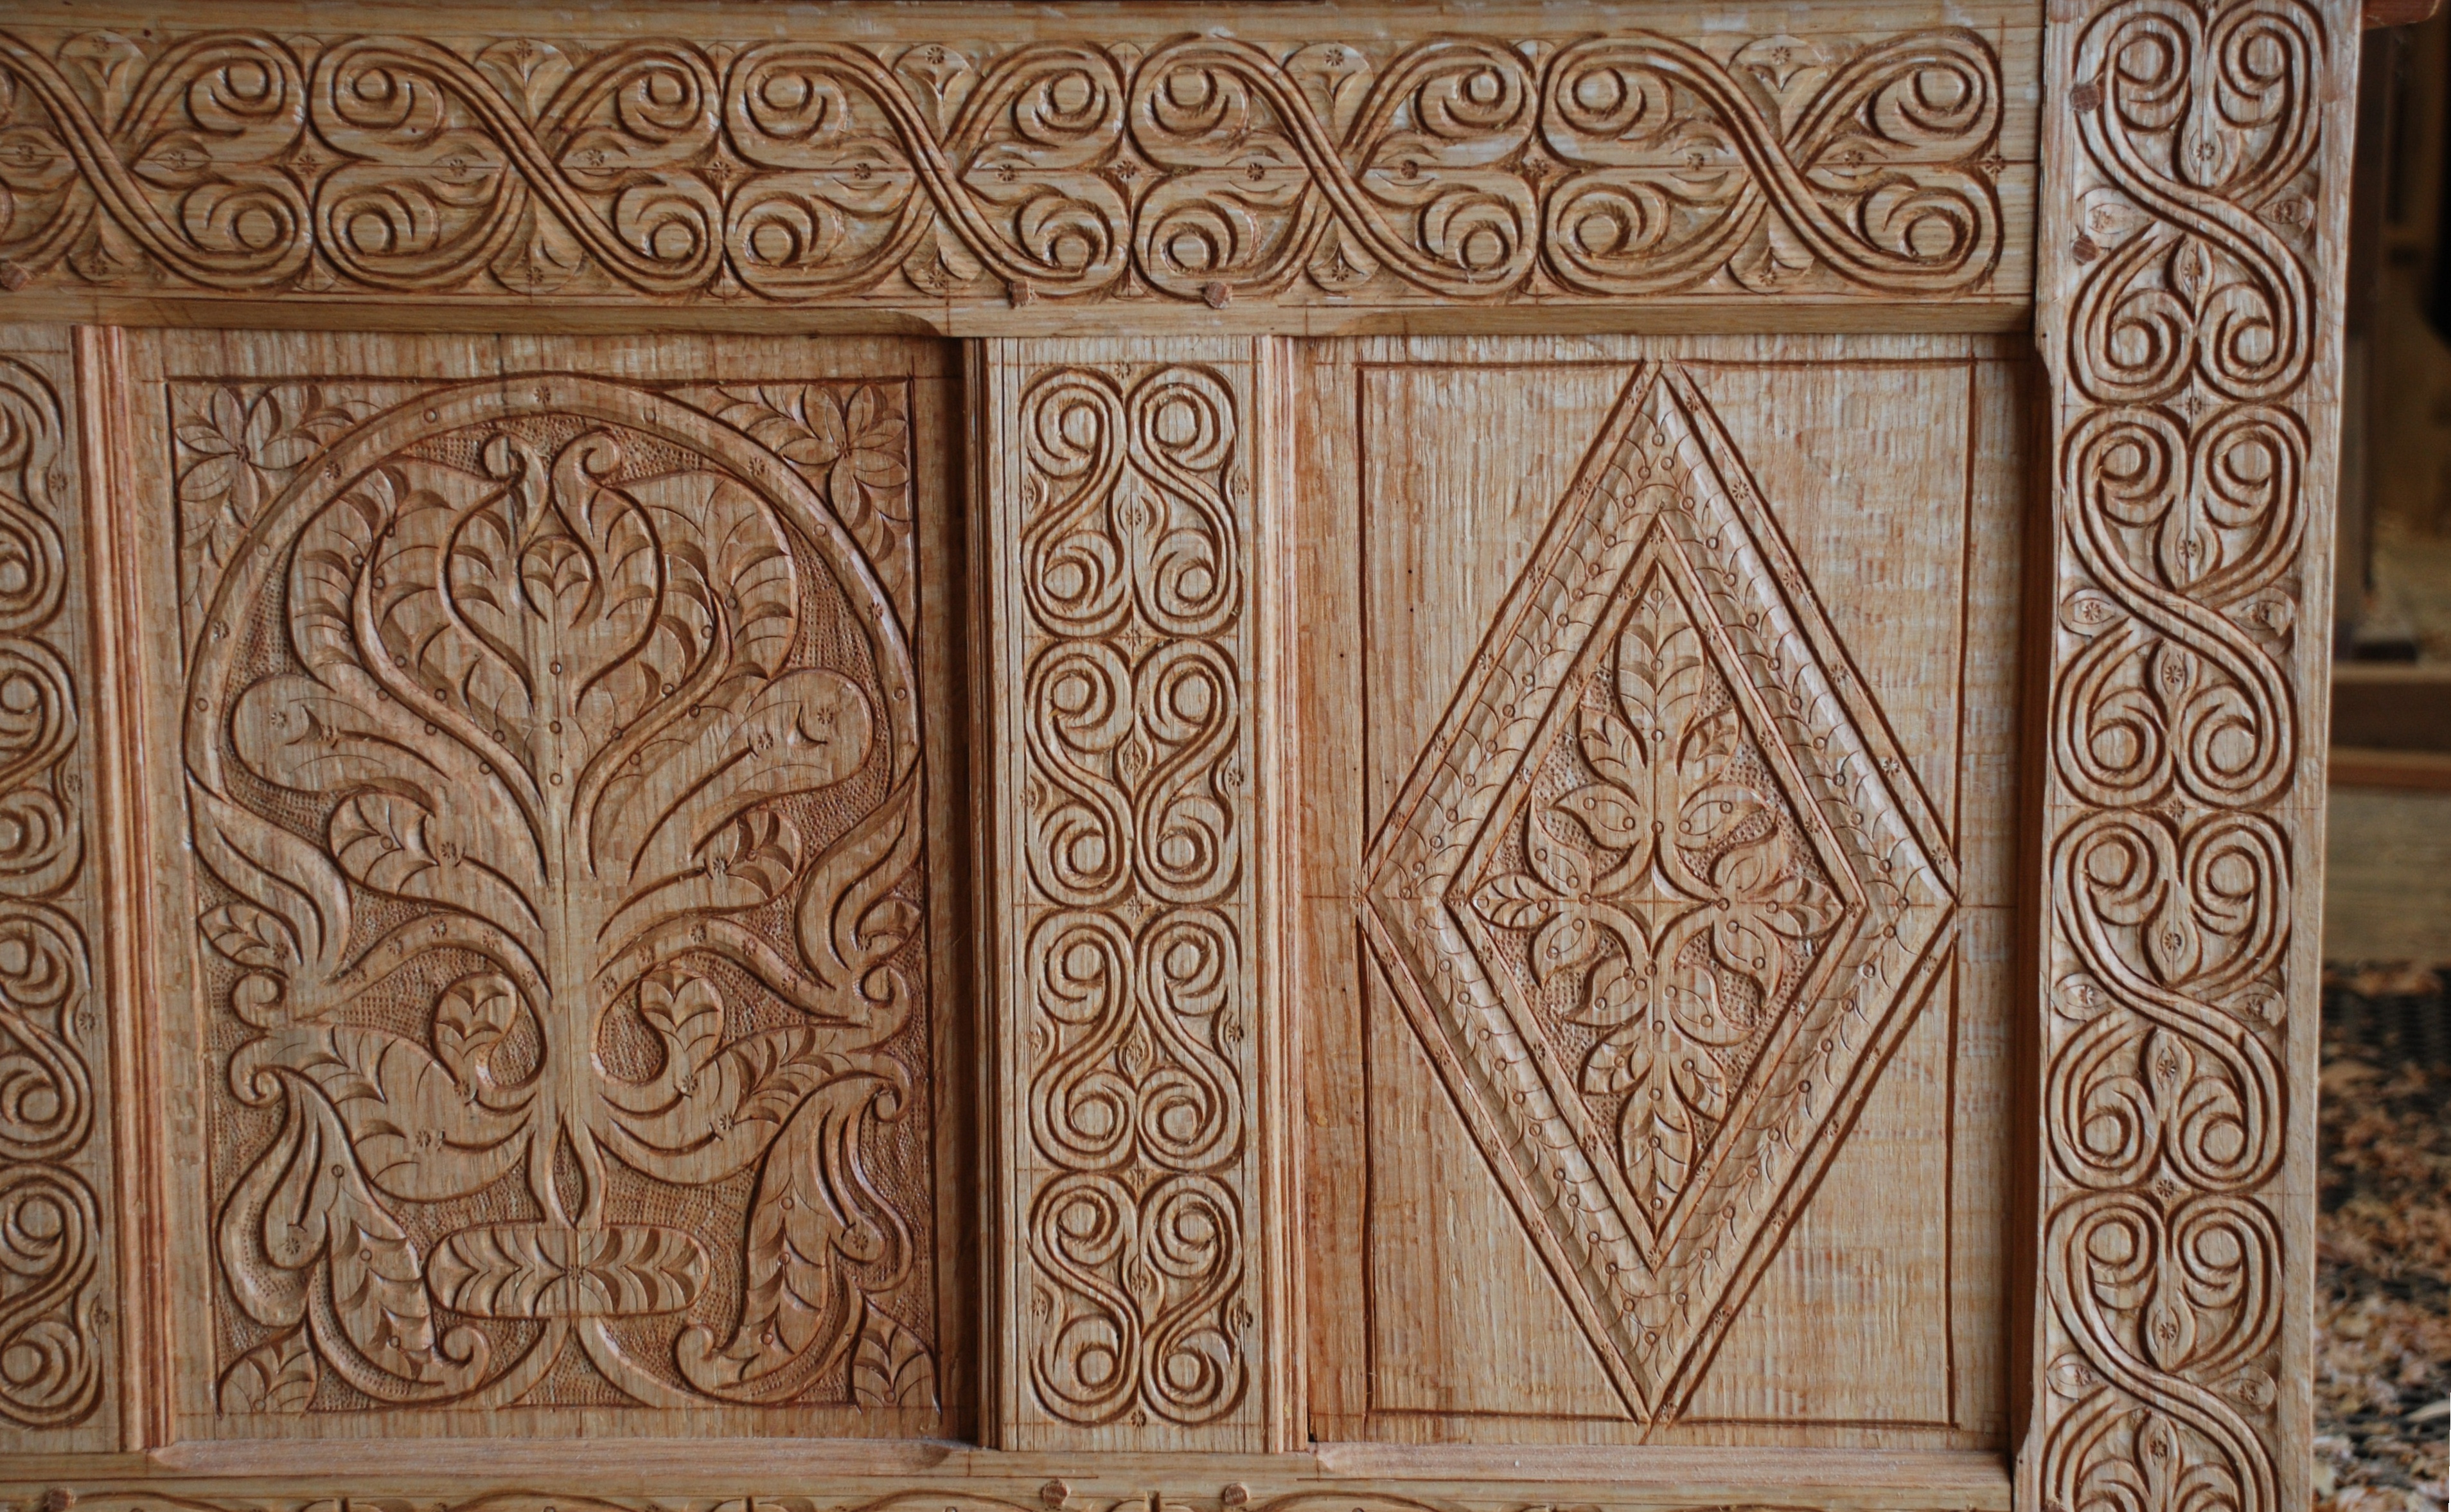 Wood Carving Patterns In The Round | Carving Wood